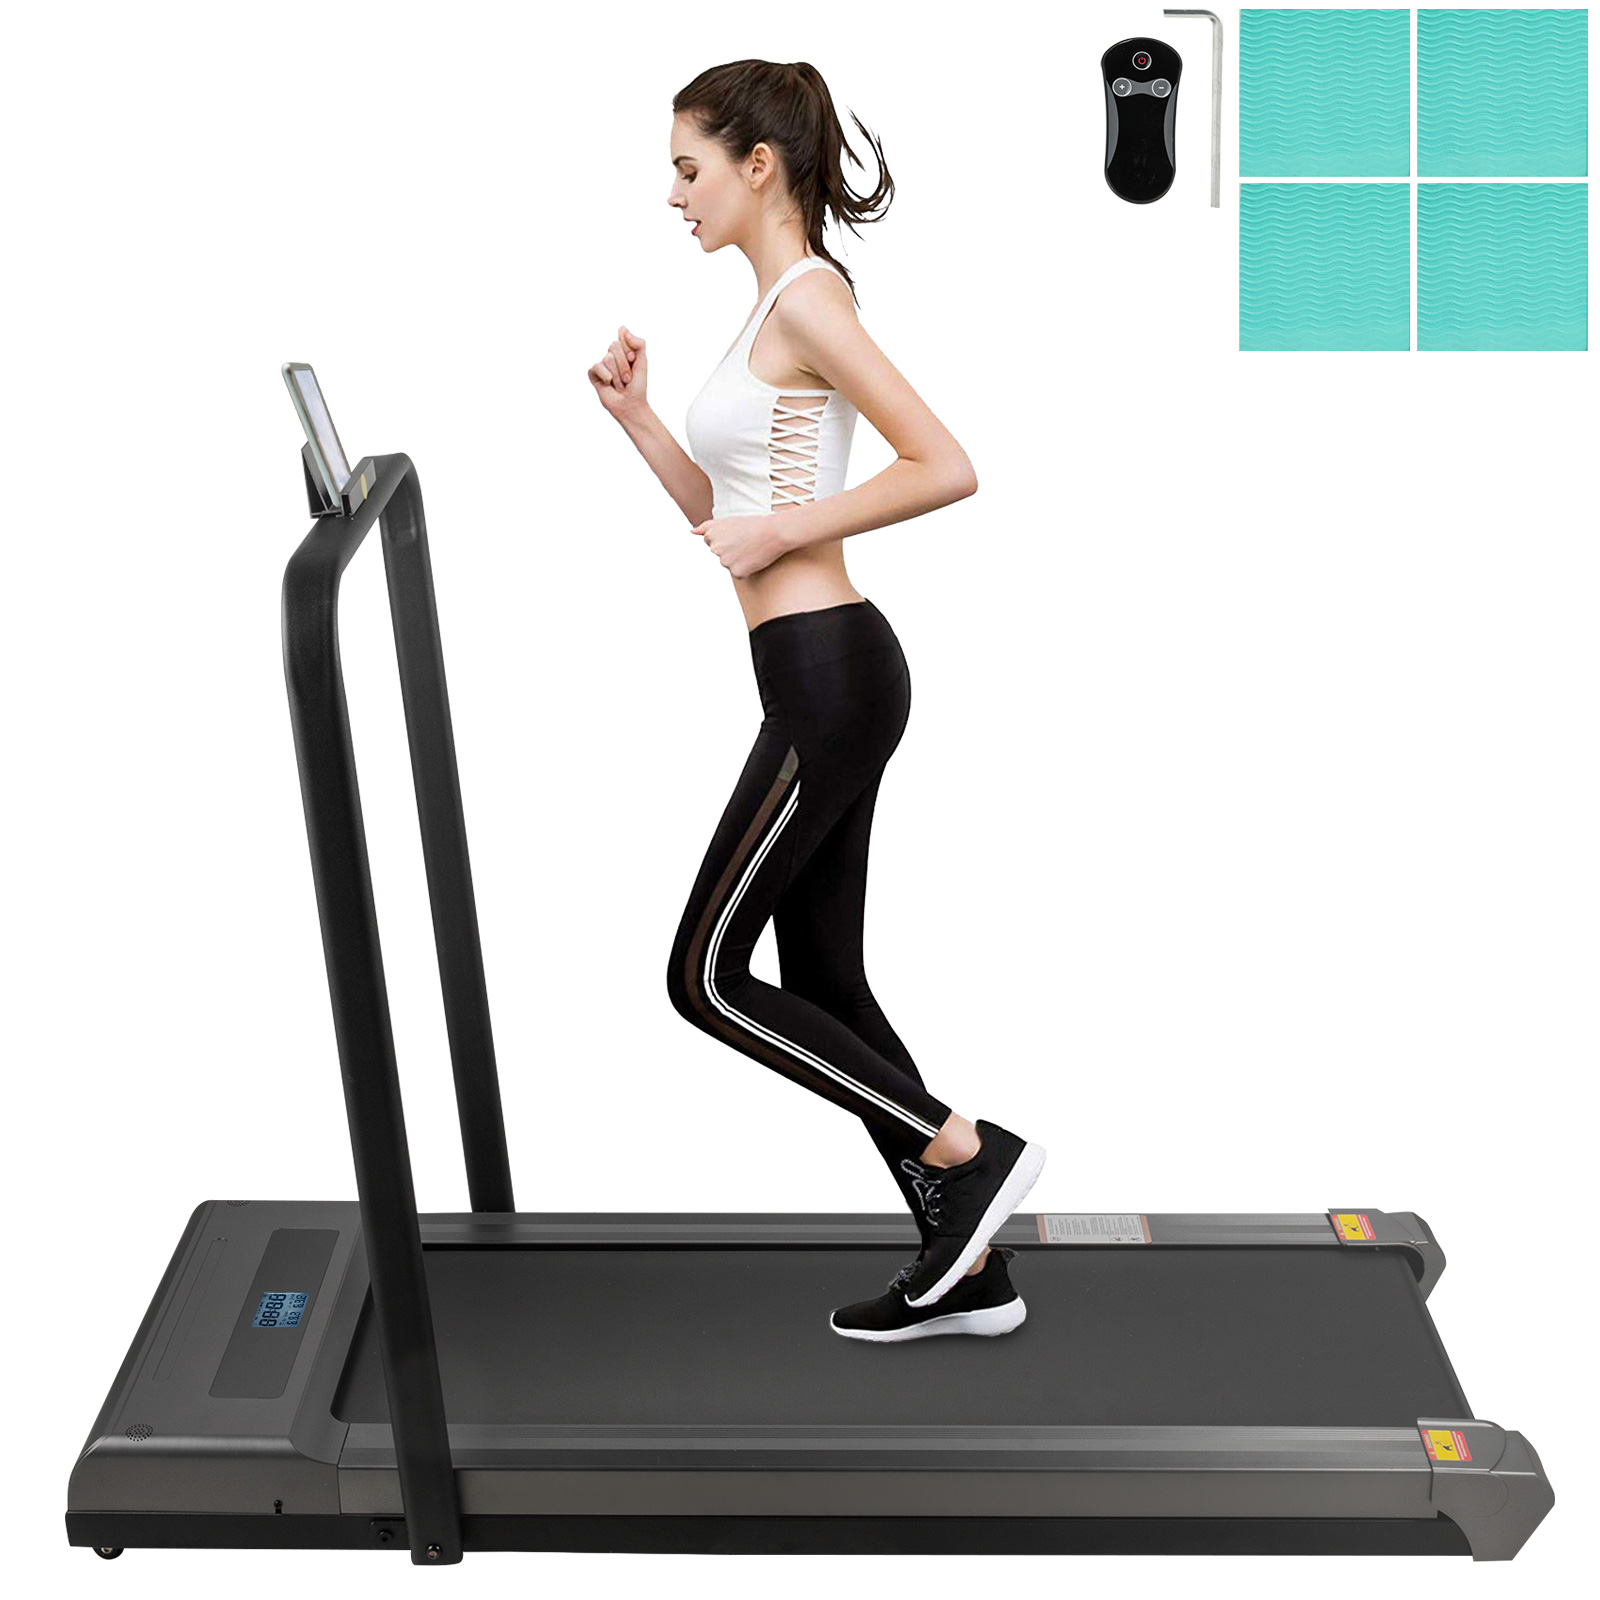 Details about   Electric Treadmill Under Desk Treadmills Fitness Training w/Remote Control US 